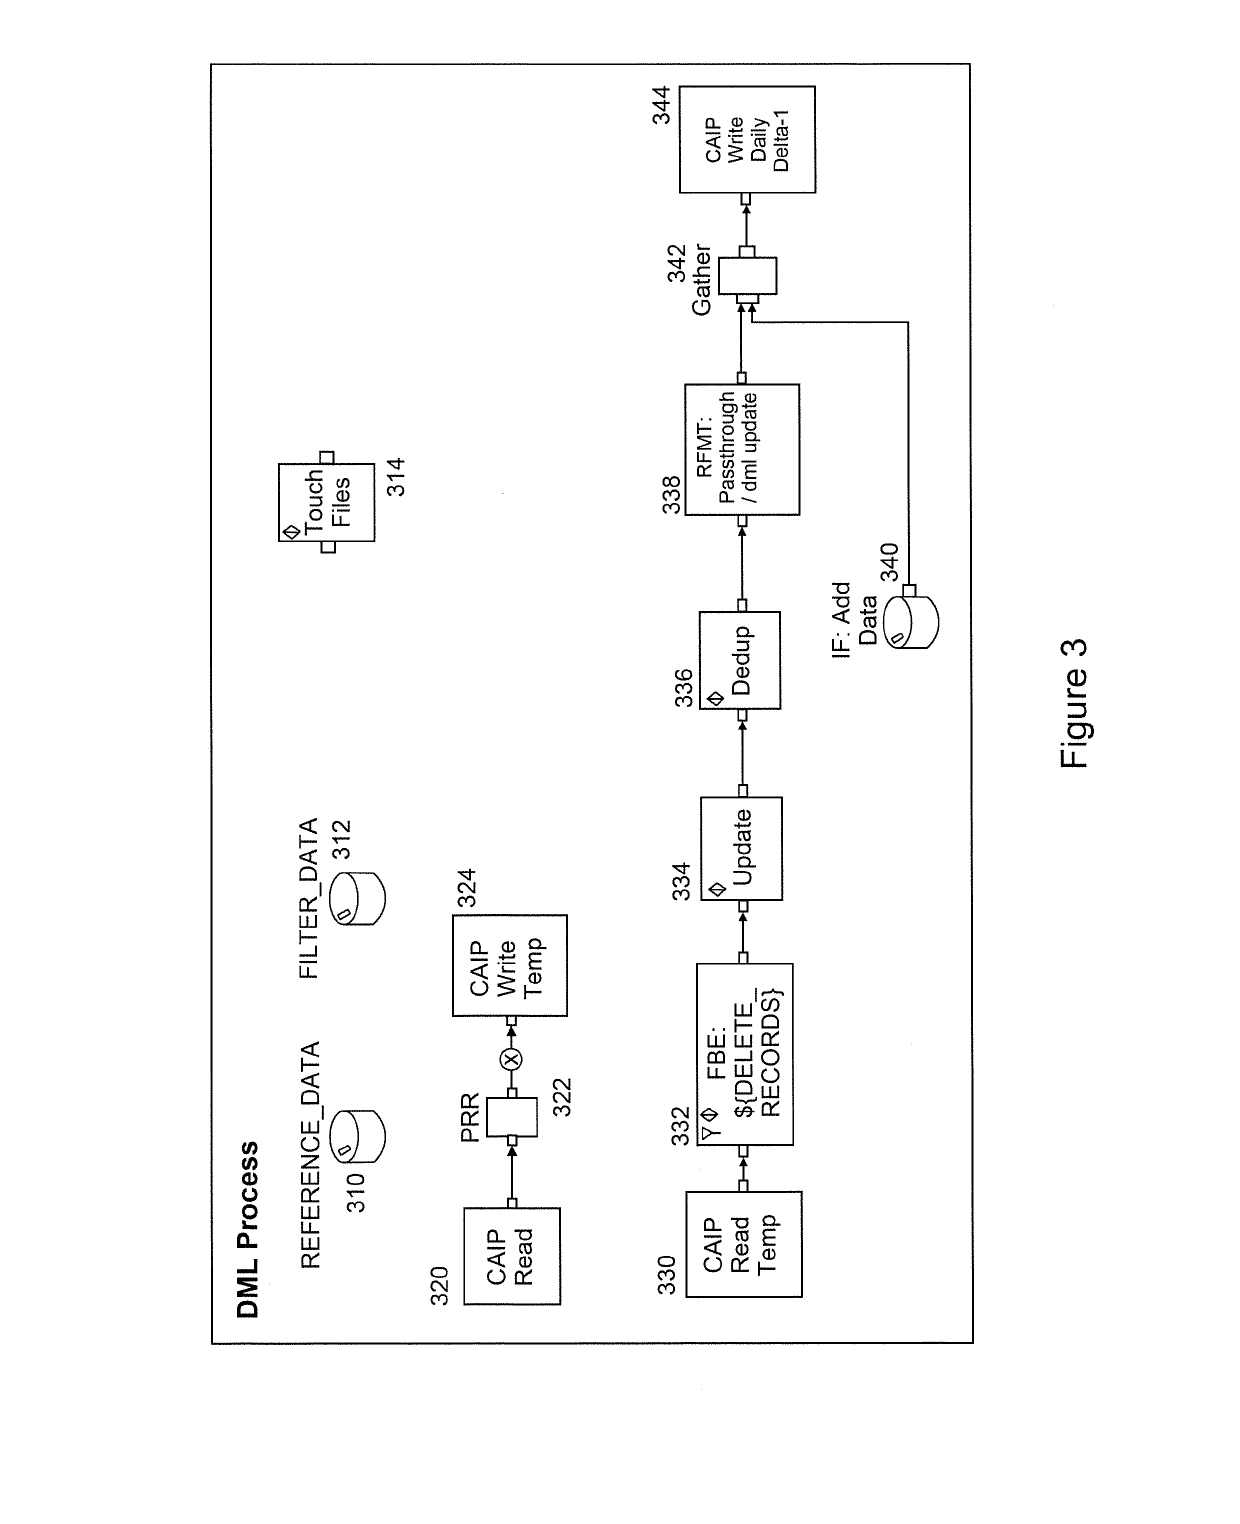 System and method for implementing data manipulation language (DML) on hadoop